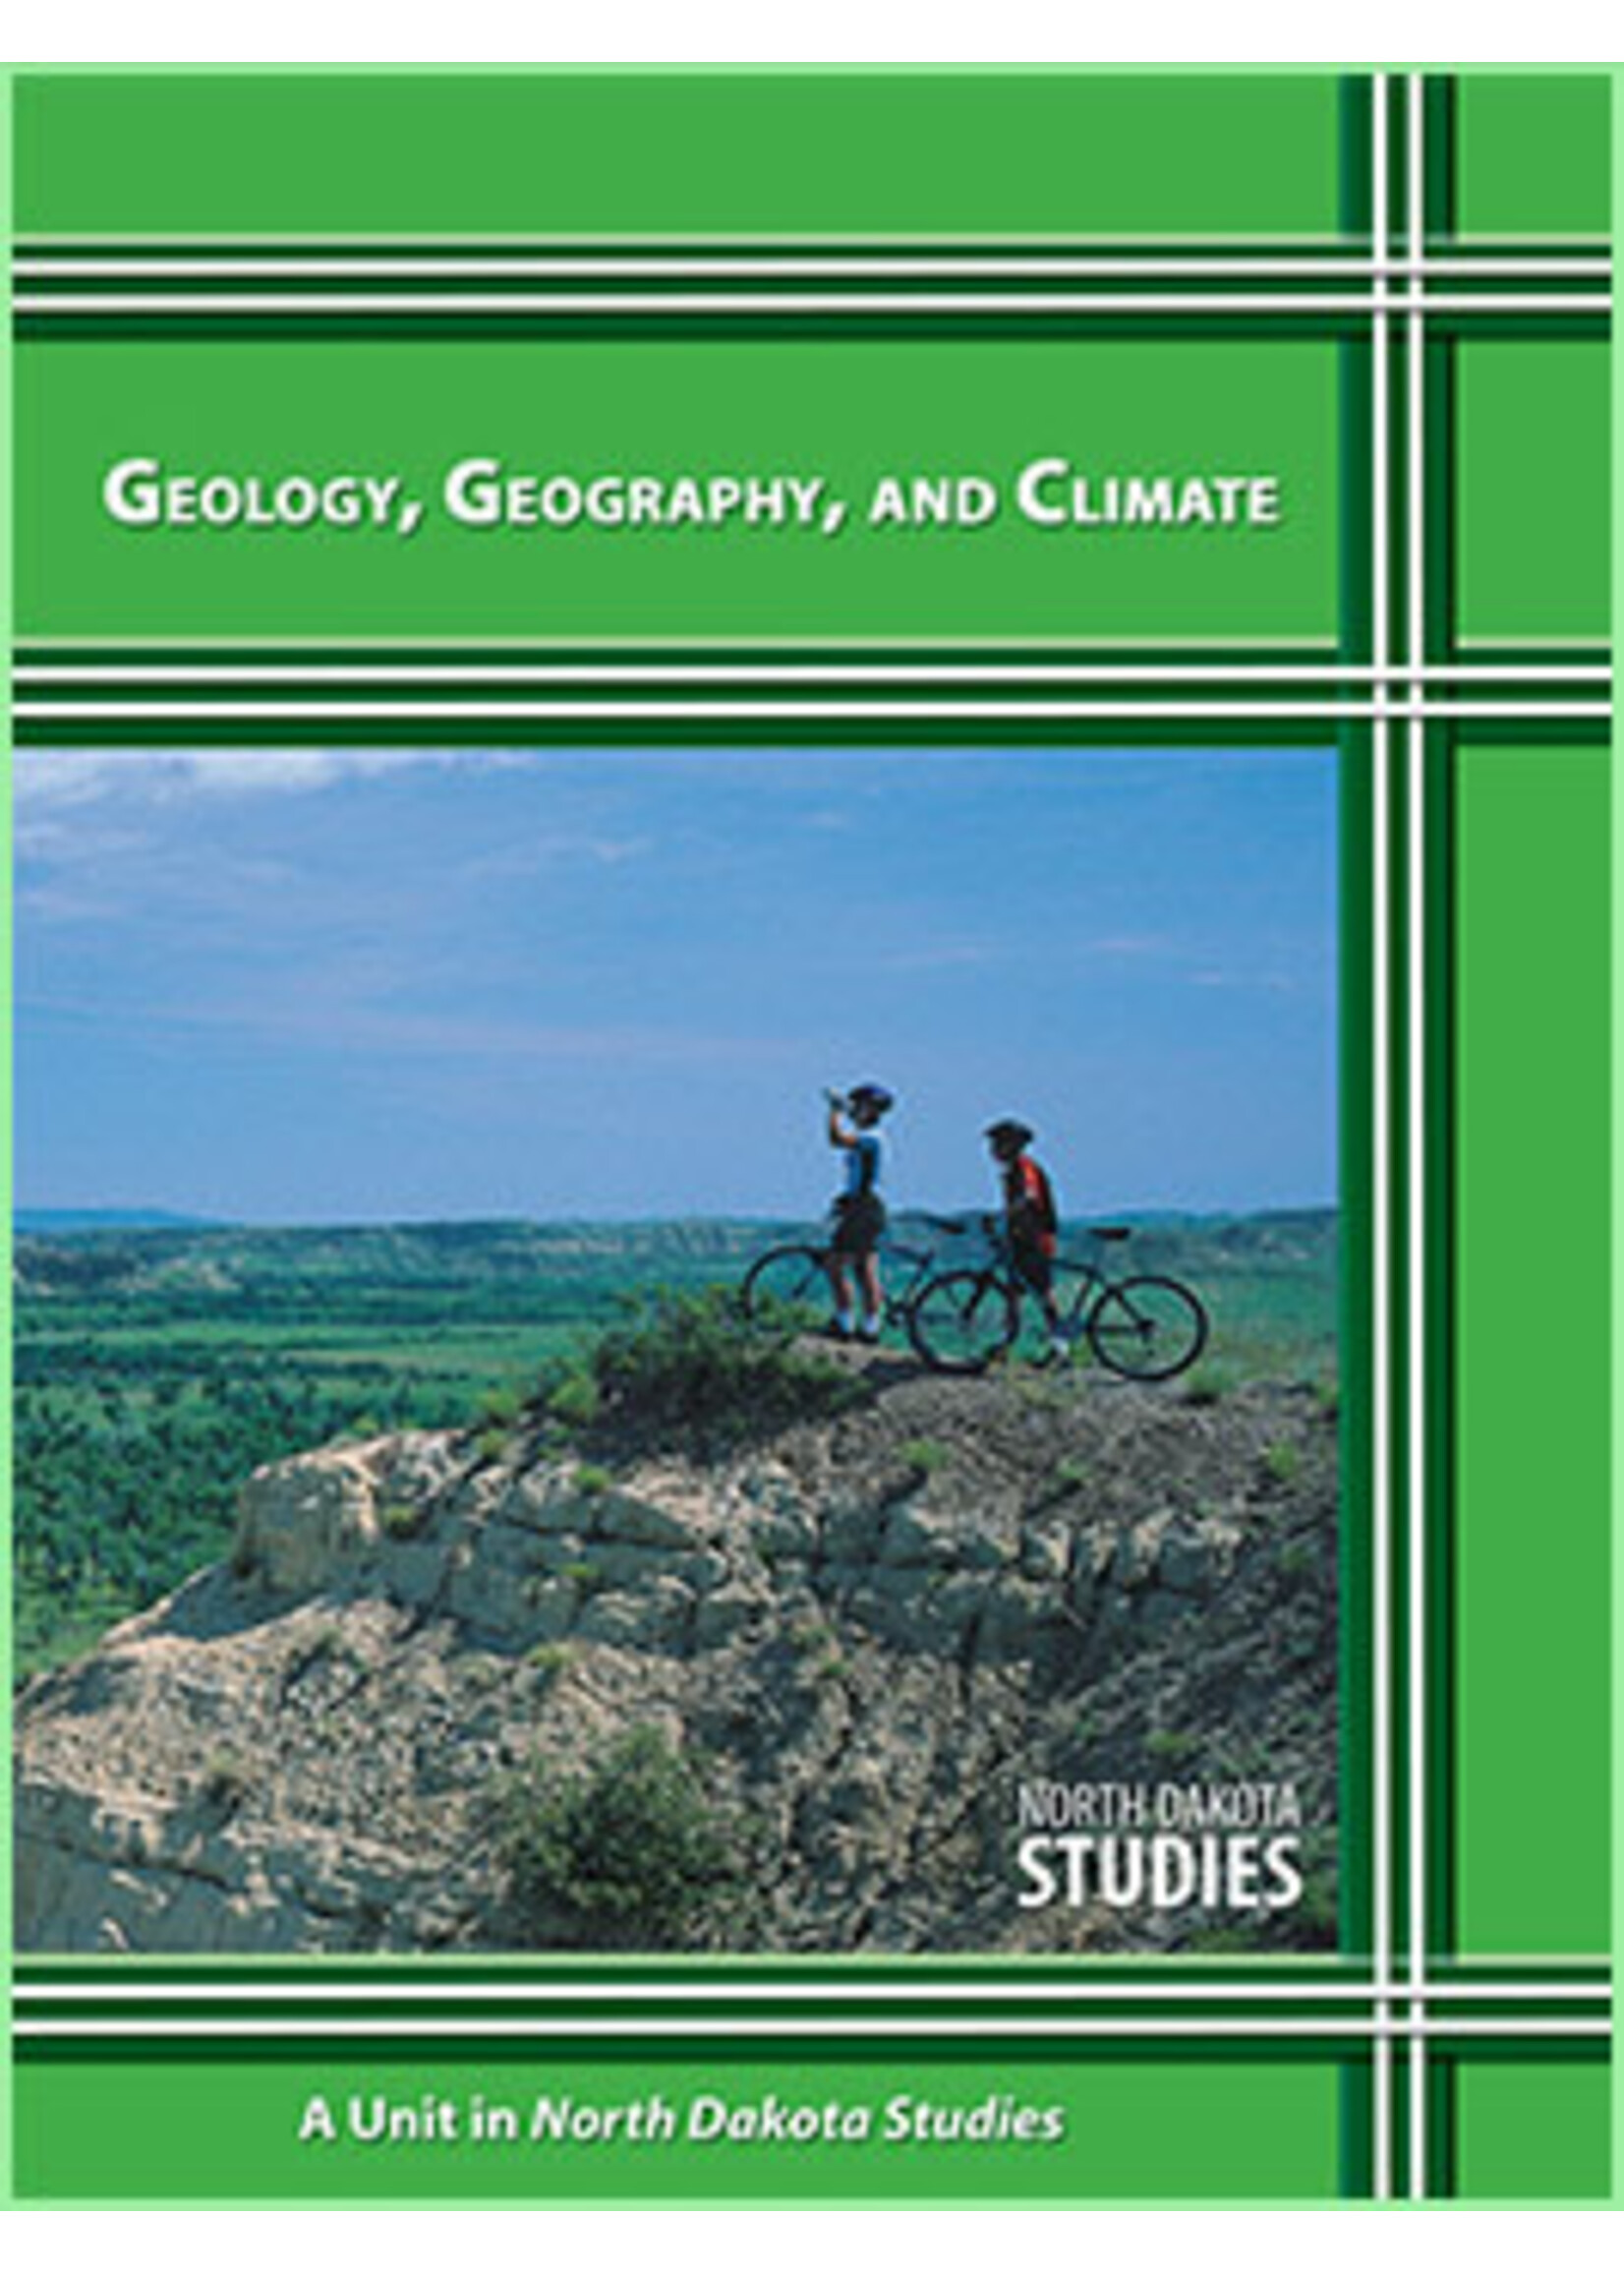 North Dakota Studies: Geology, Geography,  and Climate